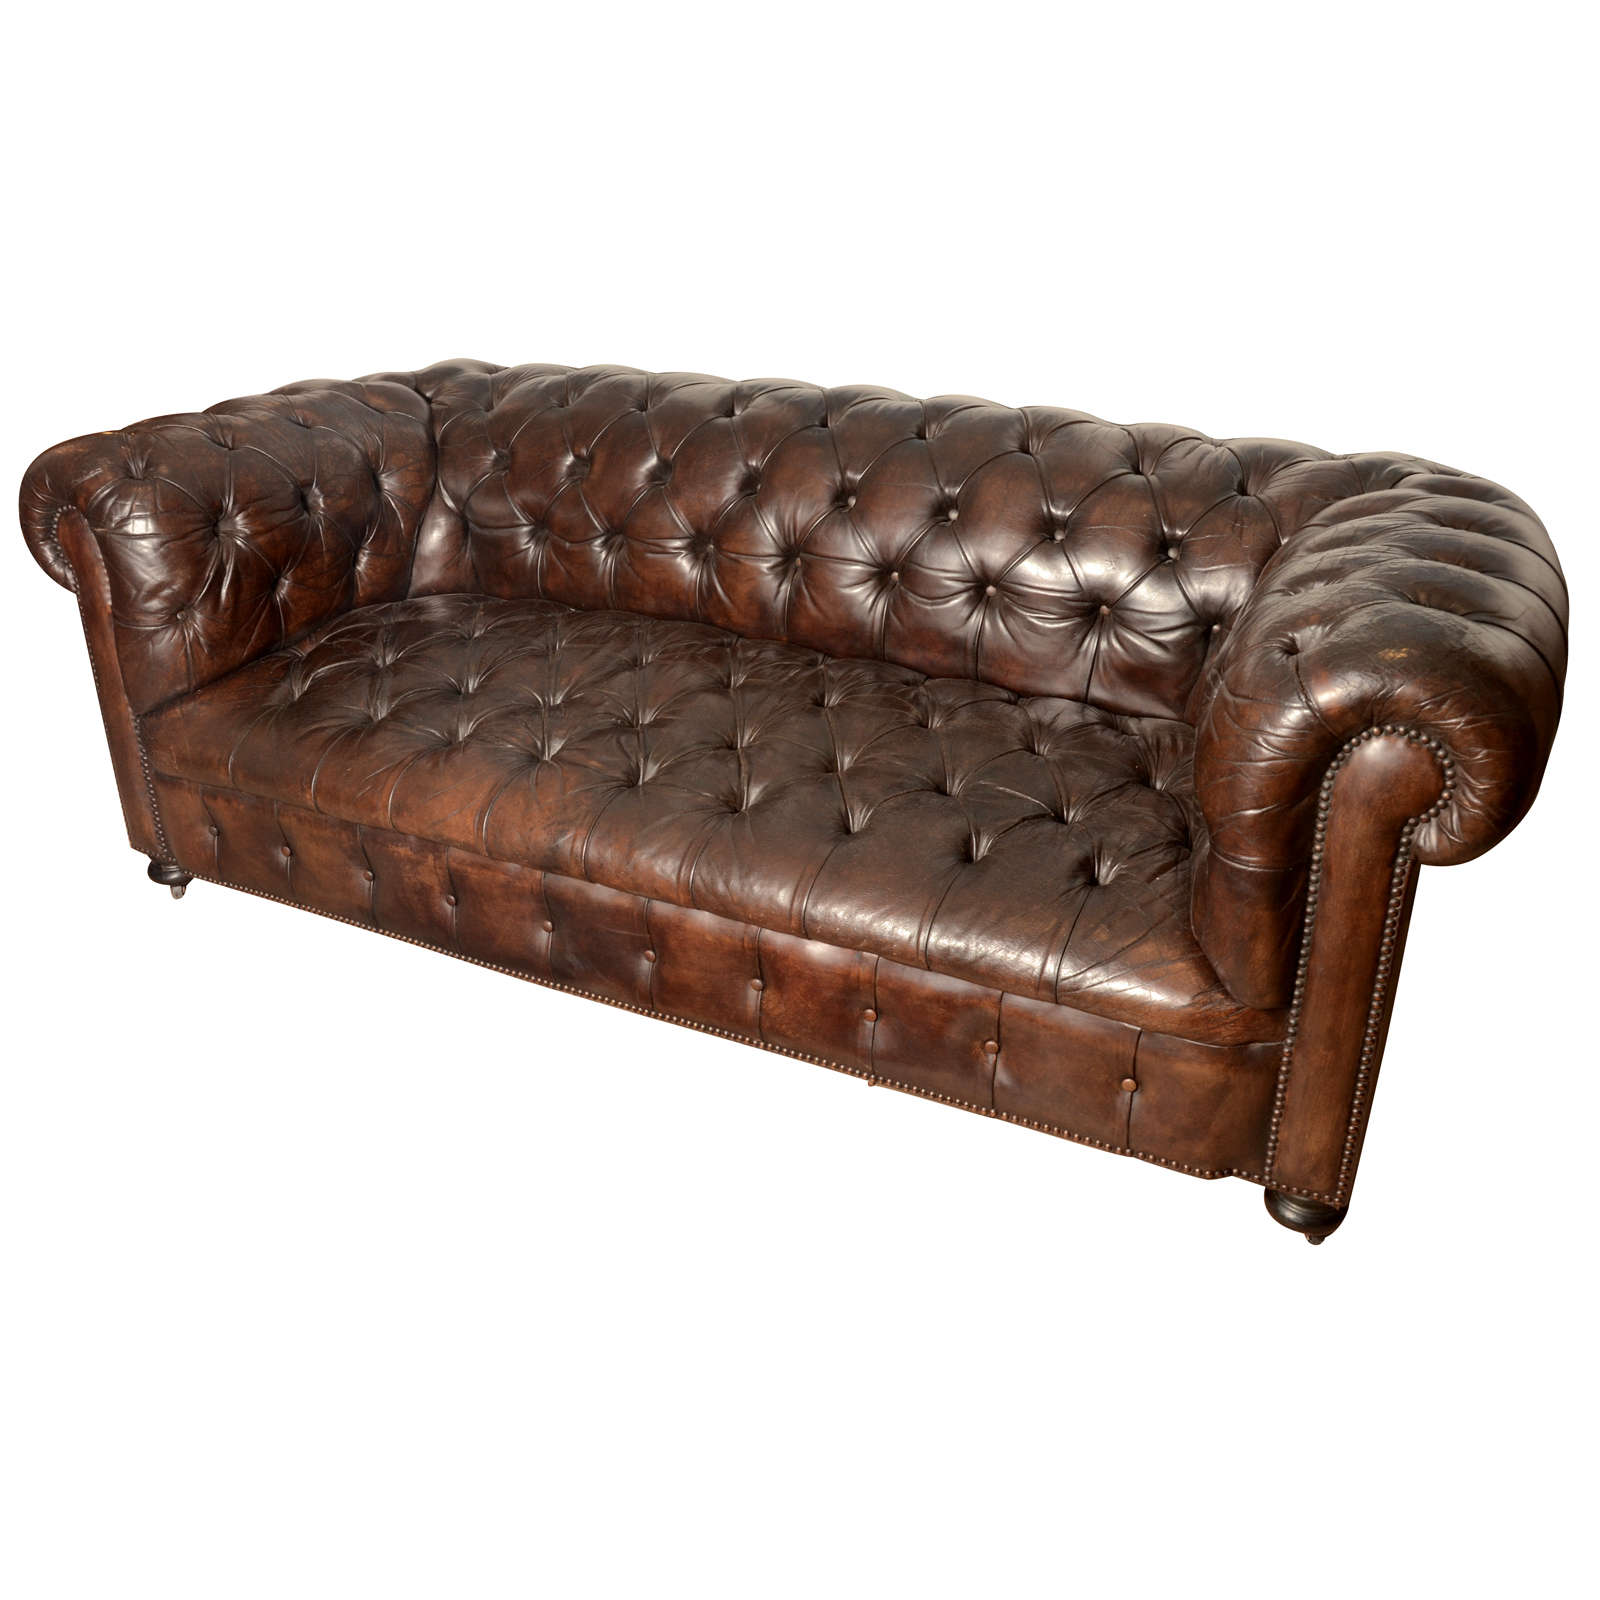 French Midcentury Chesterfield Sofa in Dark Brown For Sale at 1stDibs